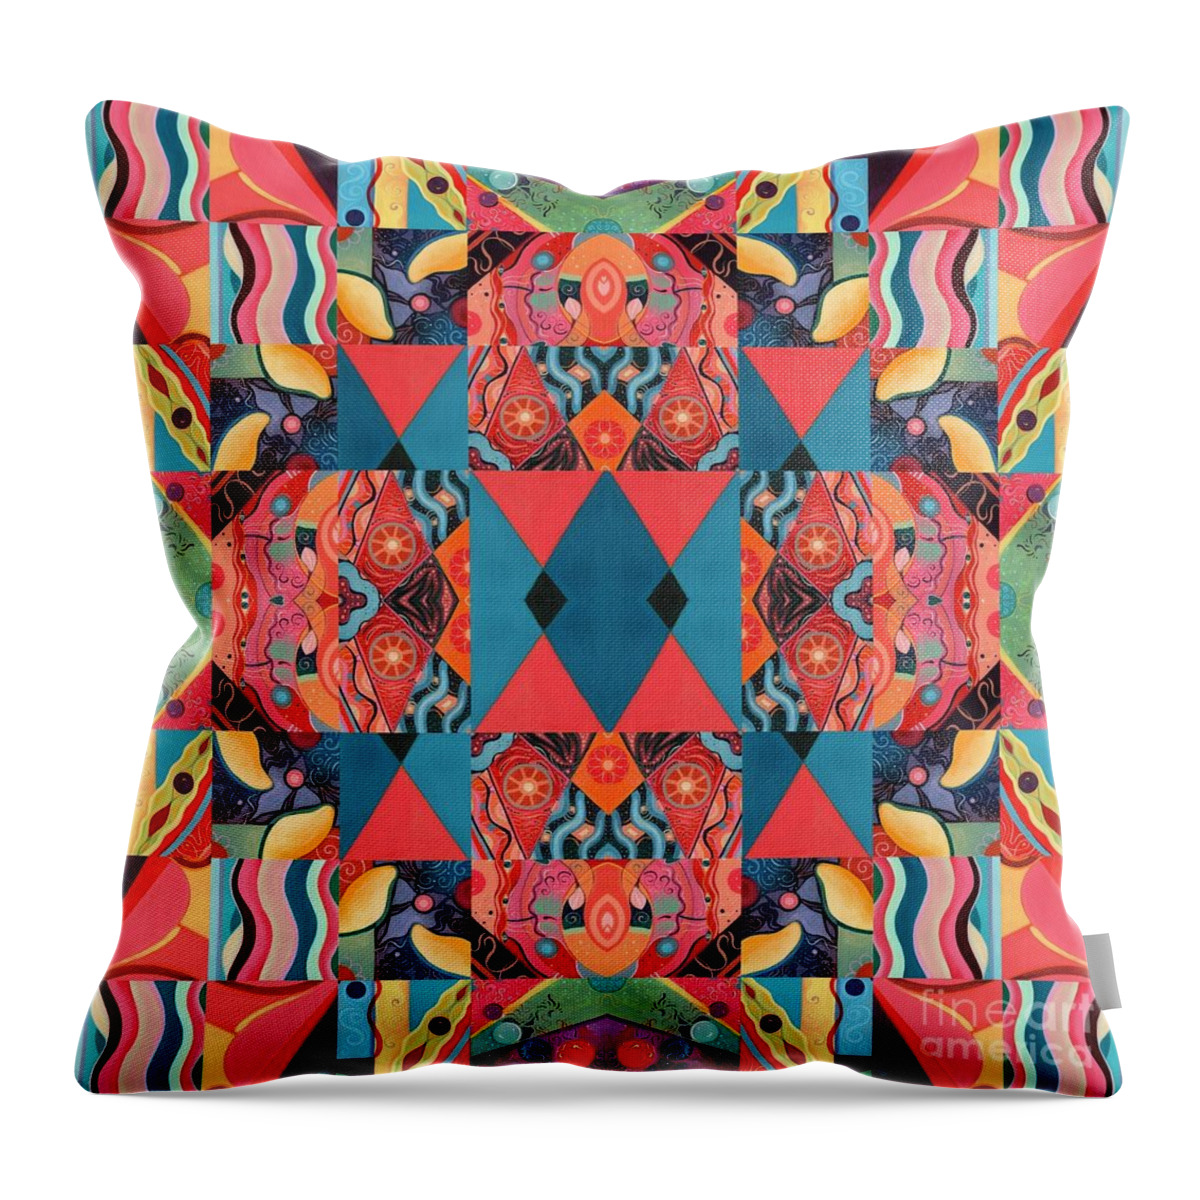 The Joy Of Design Mandala Series Puzzle 8 Arrangement 5 By Helena Tiainen Throw Pillow featuring the painting The Joy of Design Mandala Series Puzzle 8 Arrangement 5 by Helena Tiainen